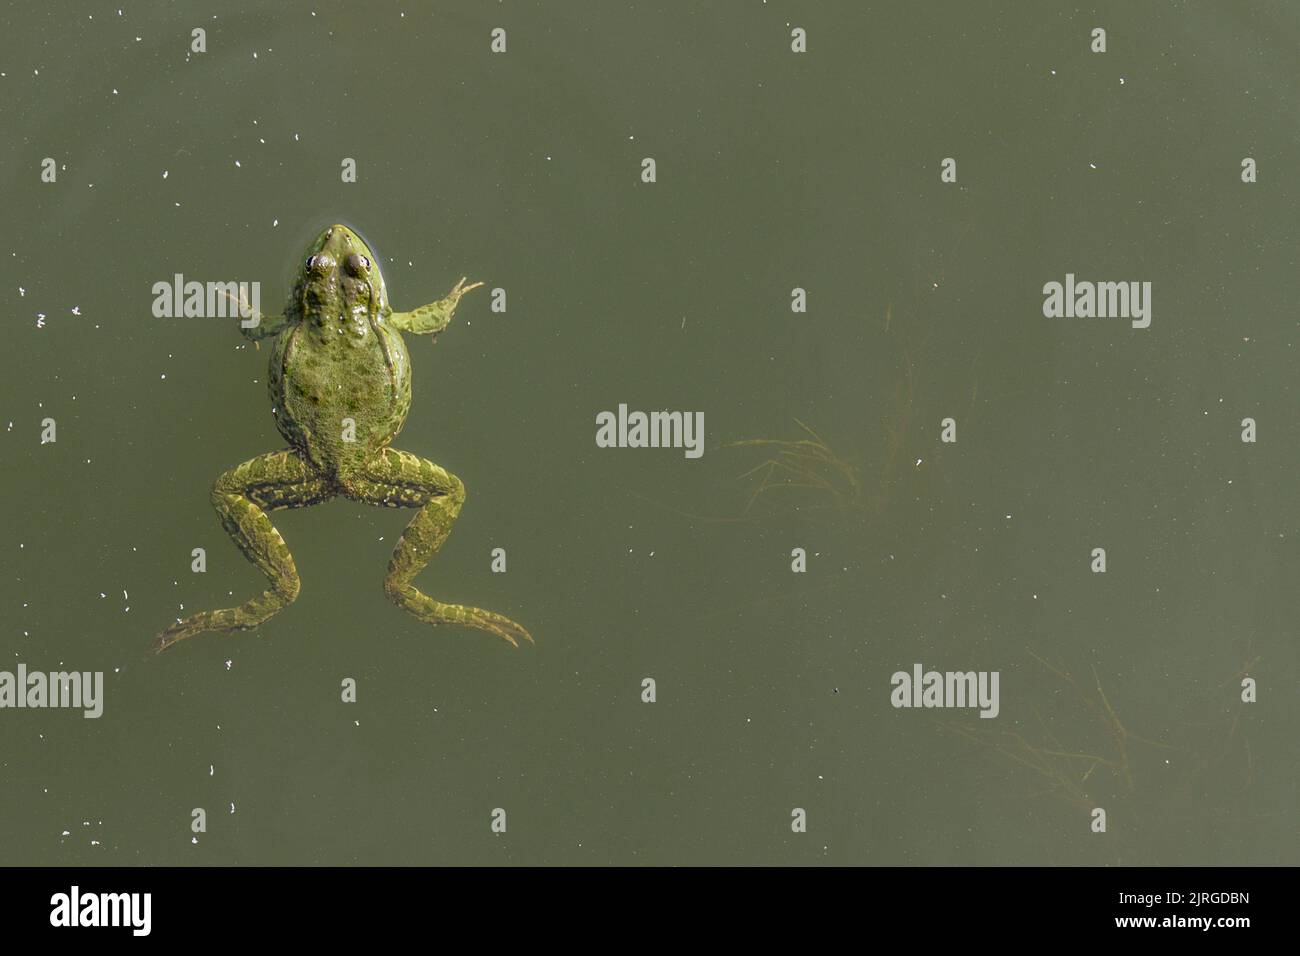 View from above on the frog floating in the water. Stock Photo